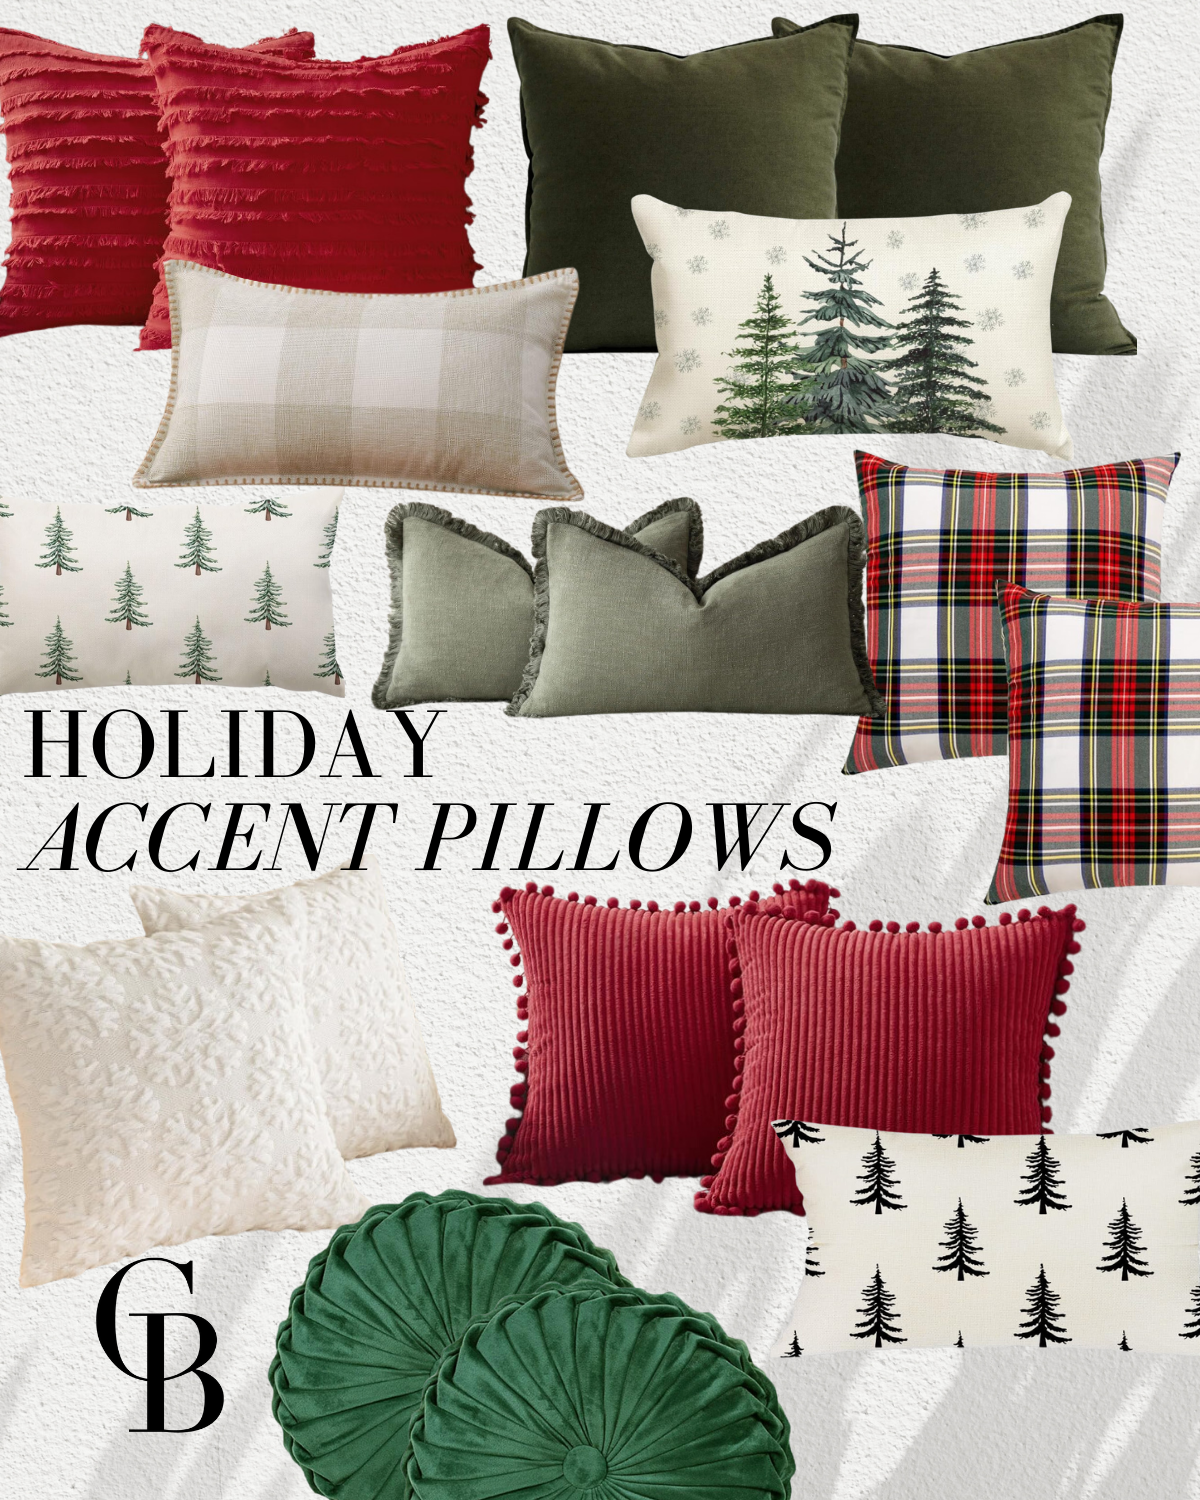 holiday home accents | #holiday #home #accents #holidayhome #holidaydecor #holidayhomedecor #pillows #holidaypillows #christmas #christmastree #livingroom #accent #couch